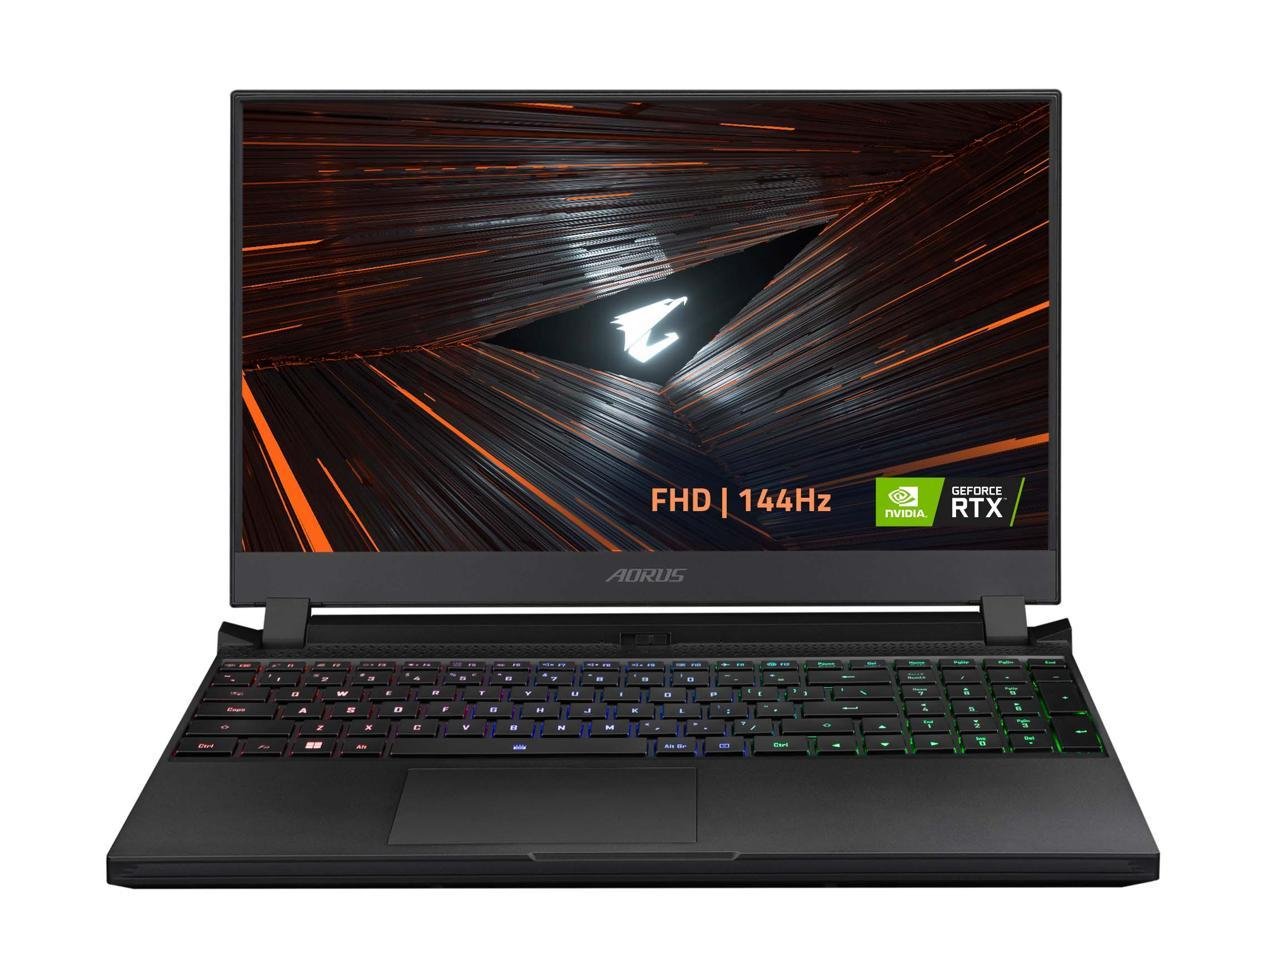 You never see an RTX 3070 laptop this cheap, but the deal ends tonight